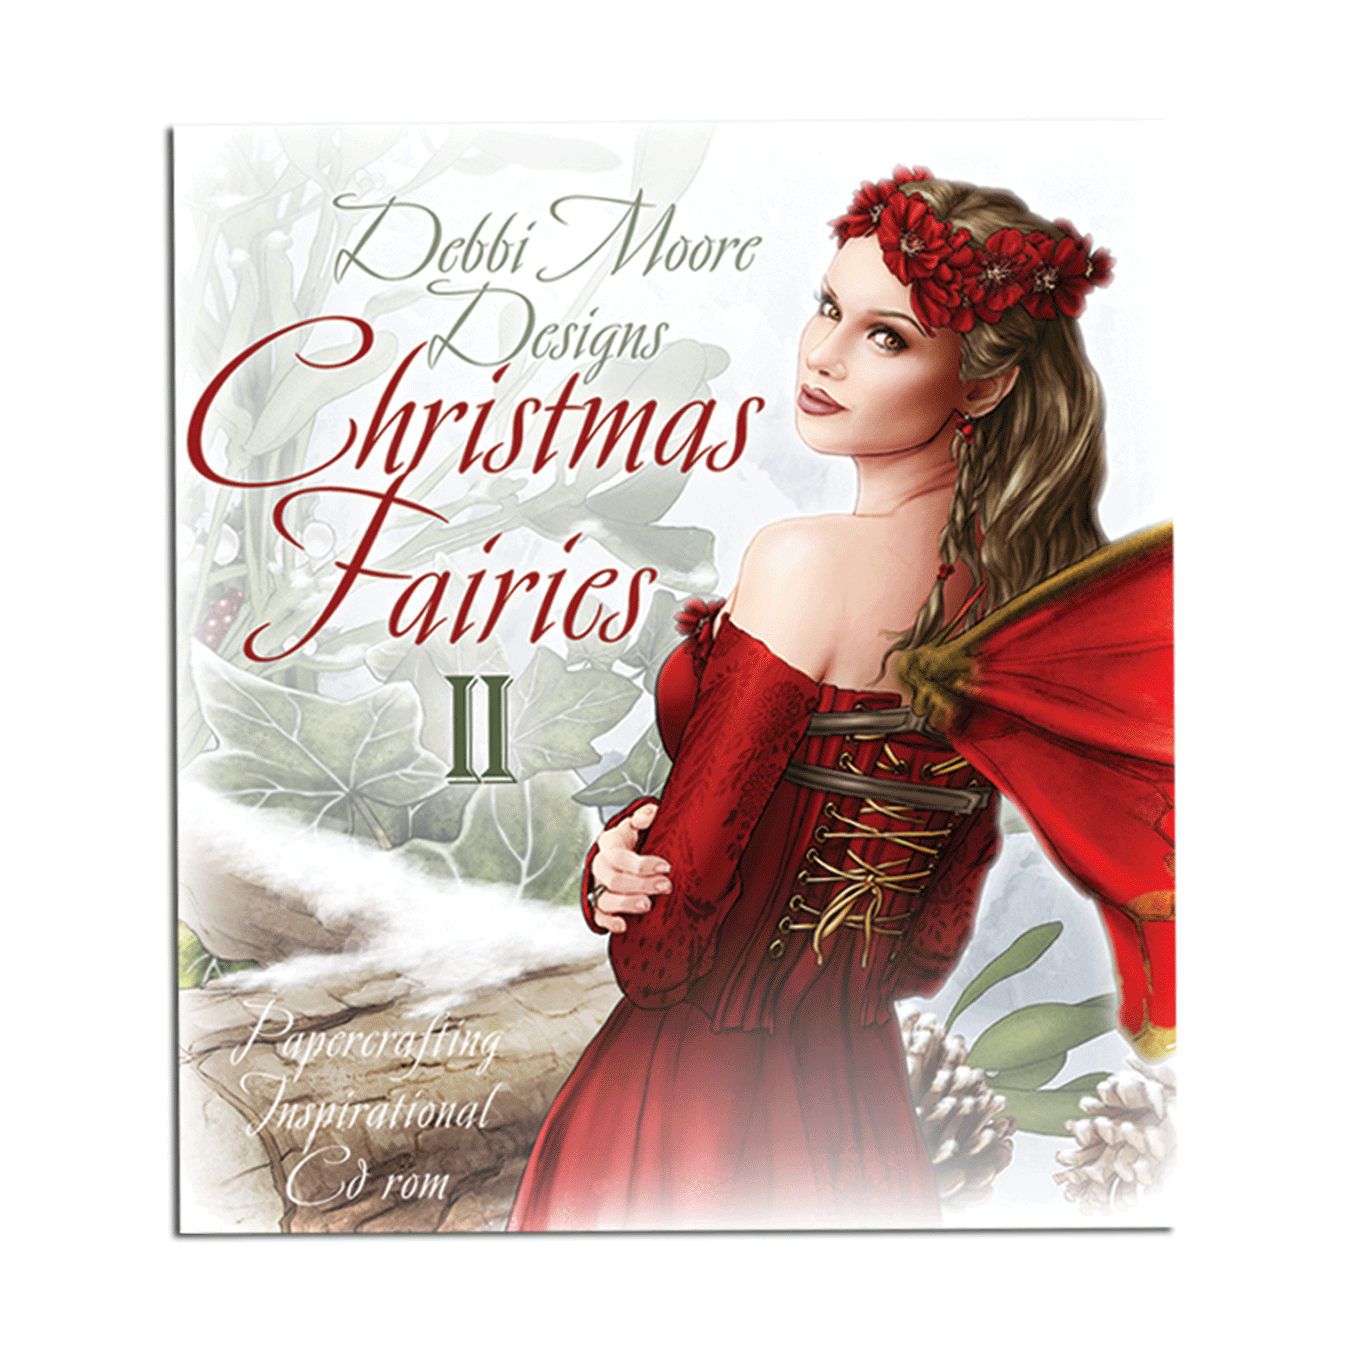 Christmas Fairies 2 Papercrafting Collection Cd Rom Usb